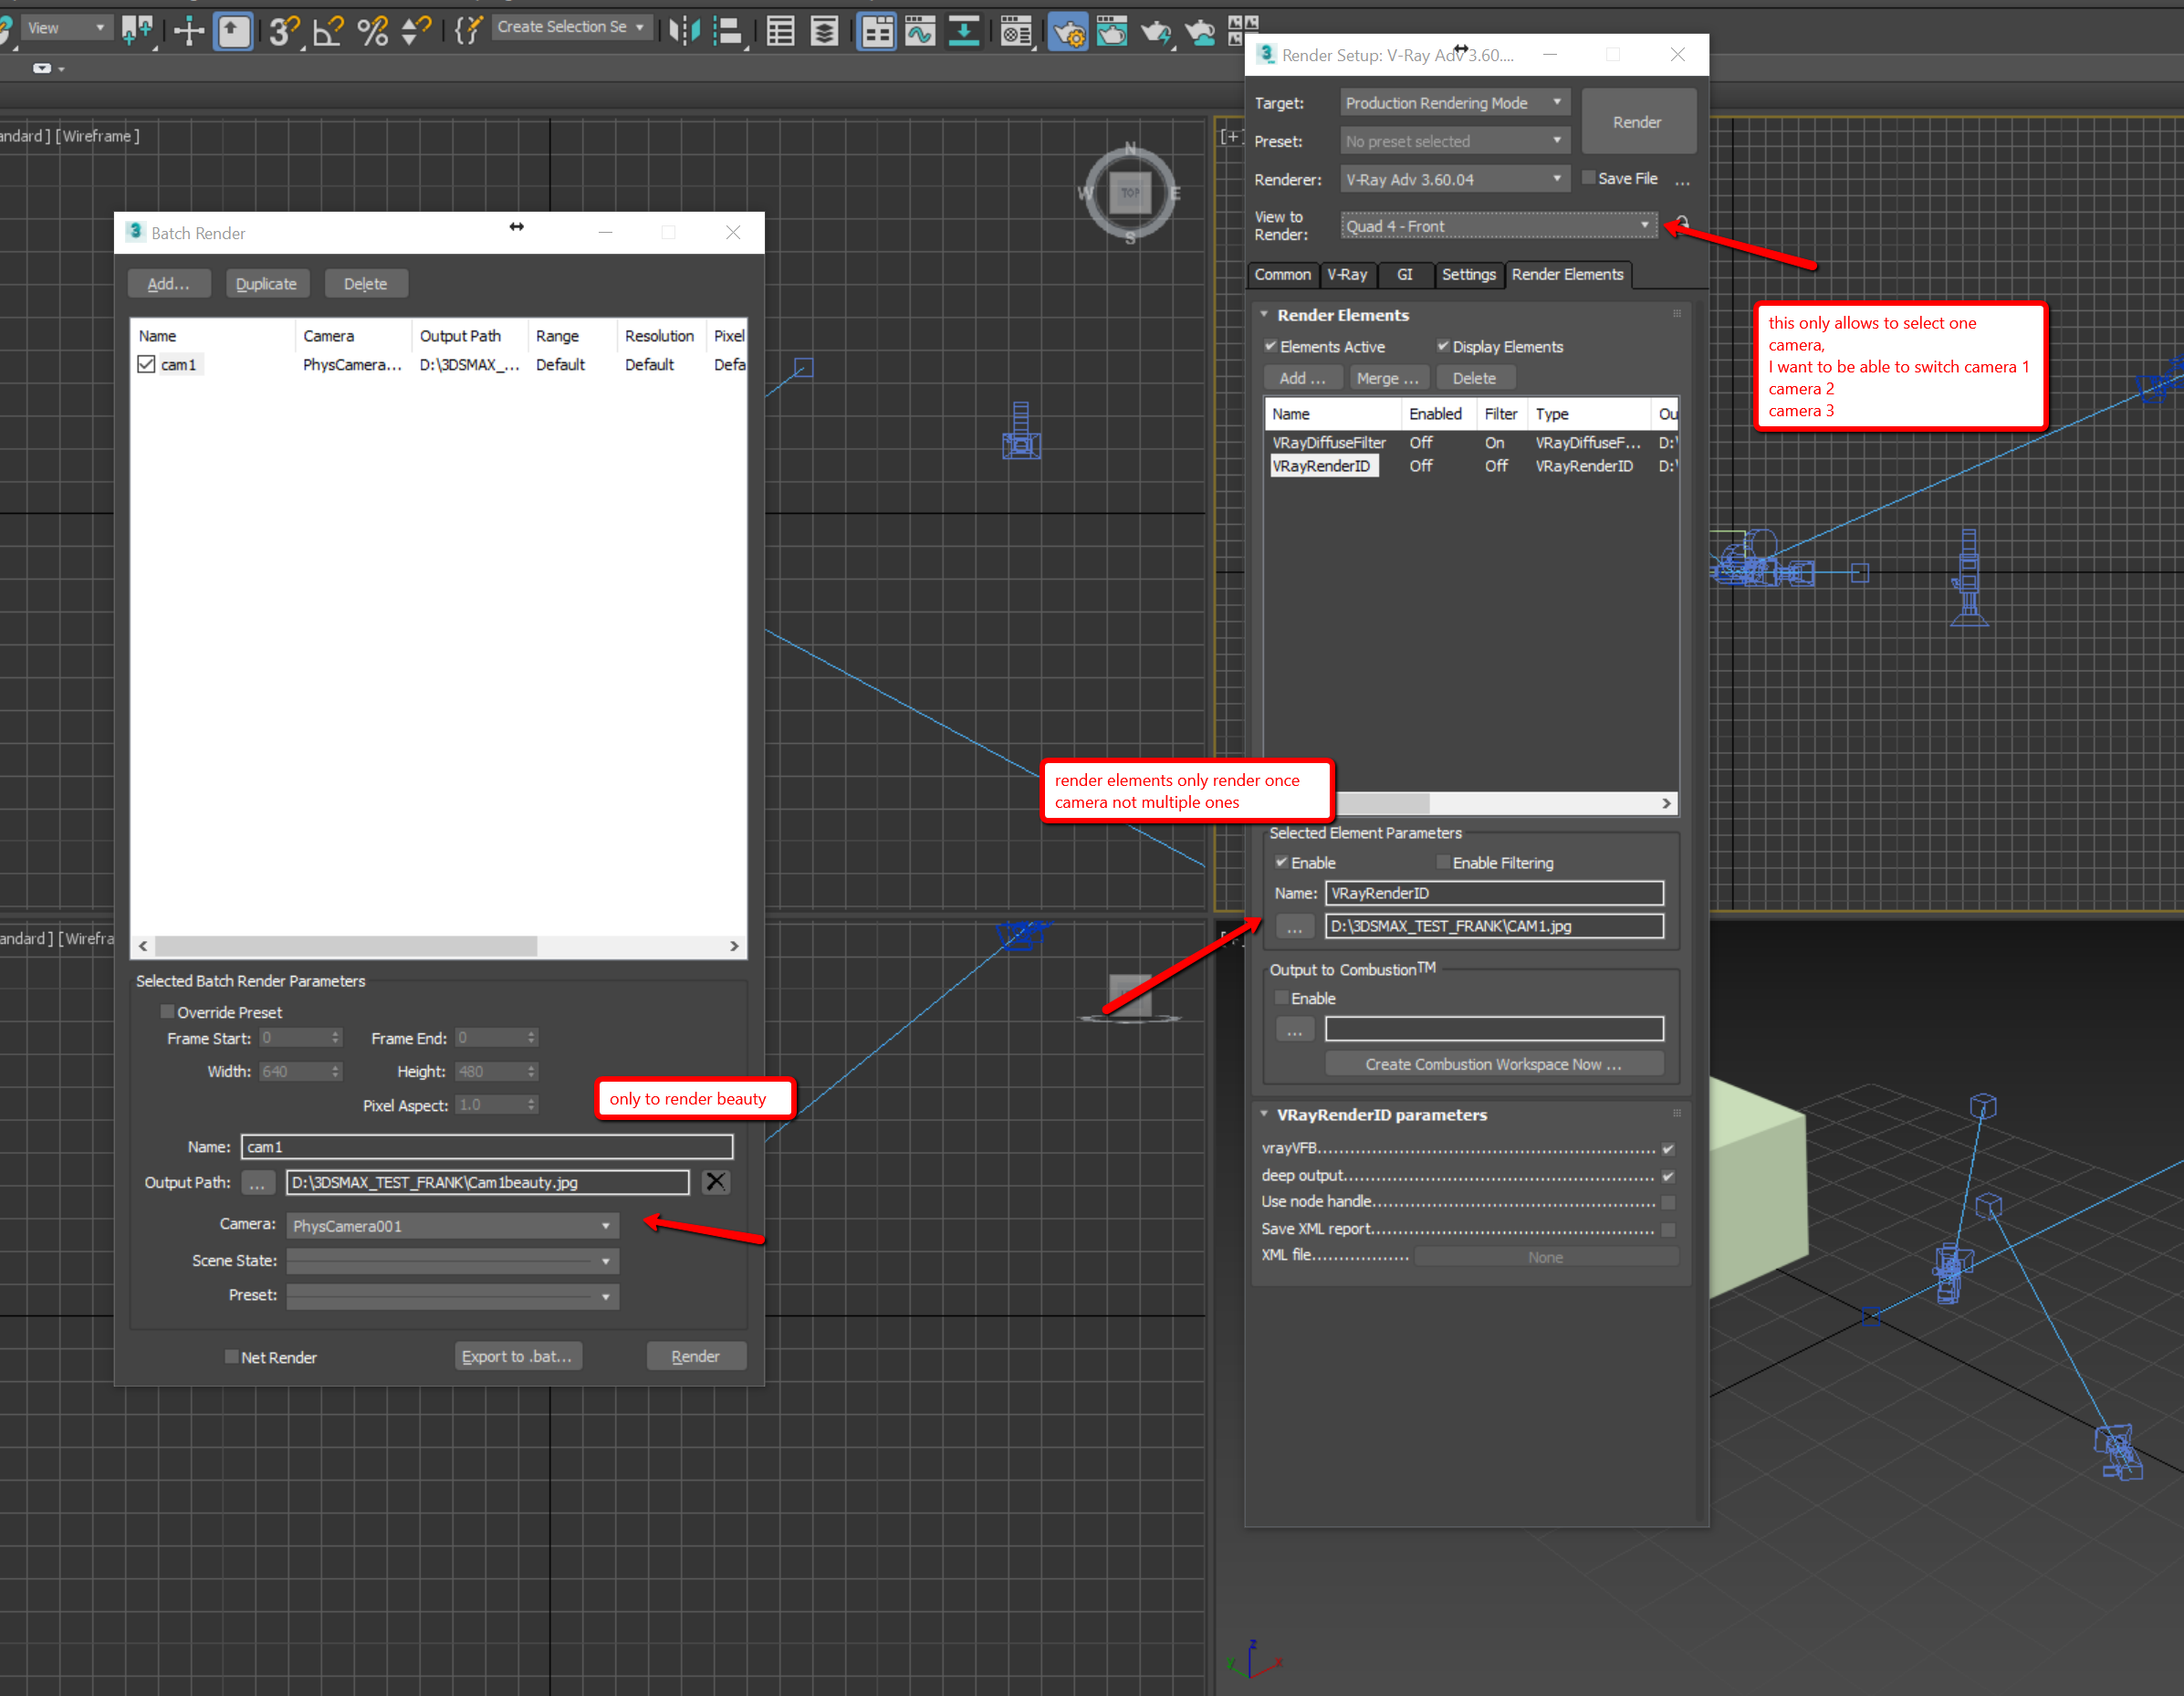 3dsmax batch render can render elements for Vray - Autodesk Community - 3ds  Max